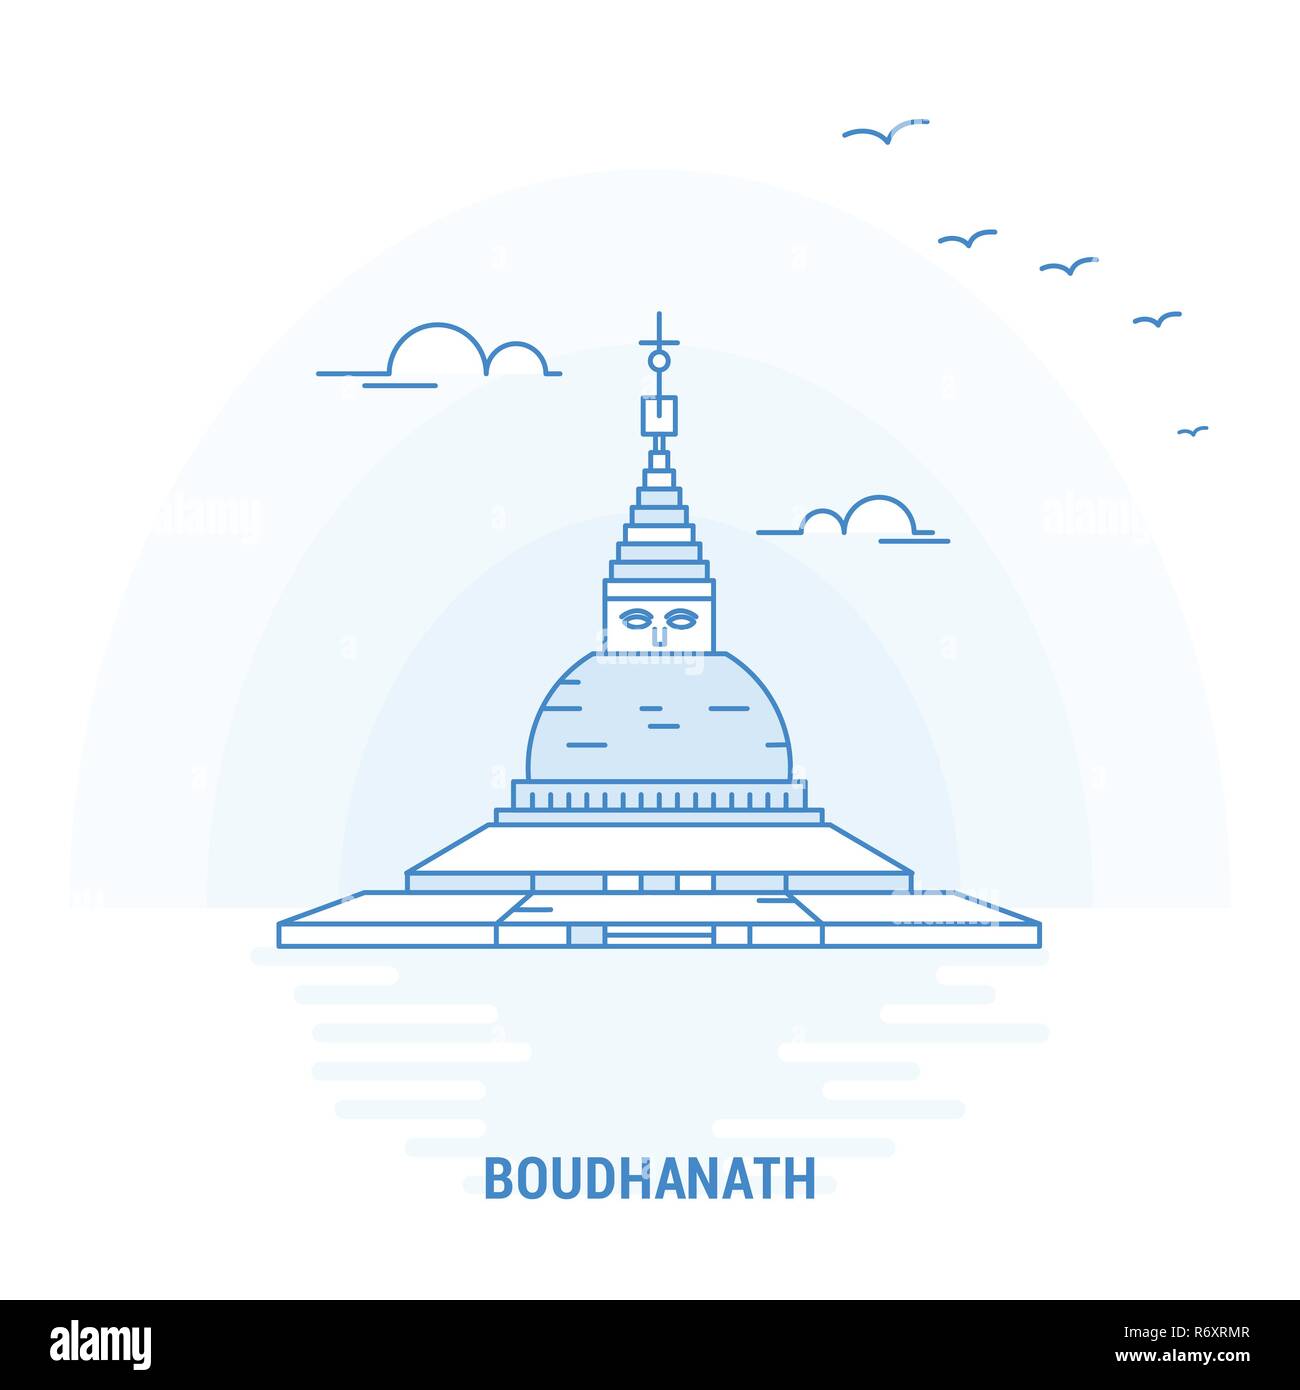 BOUDHANATH Blue Landmark. Creative background and Poster Template Stock Vector